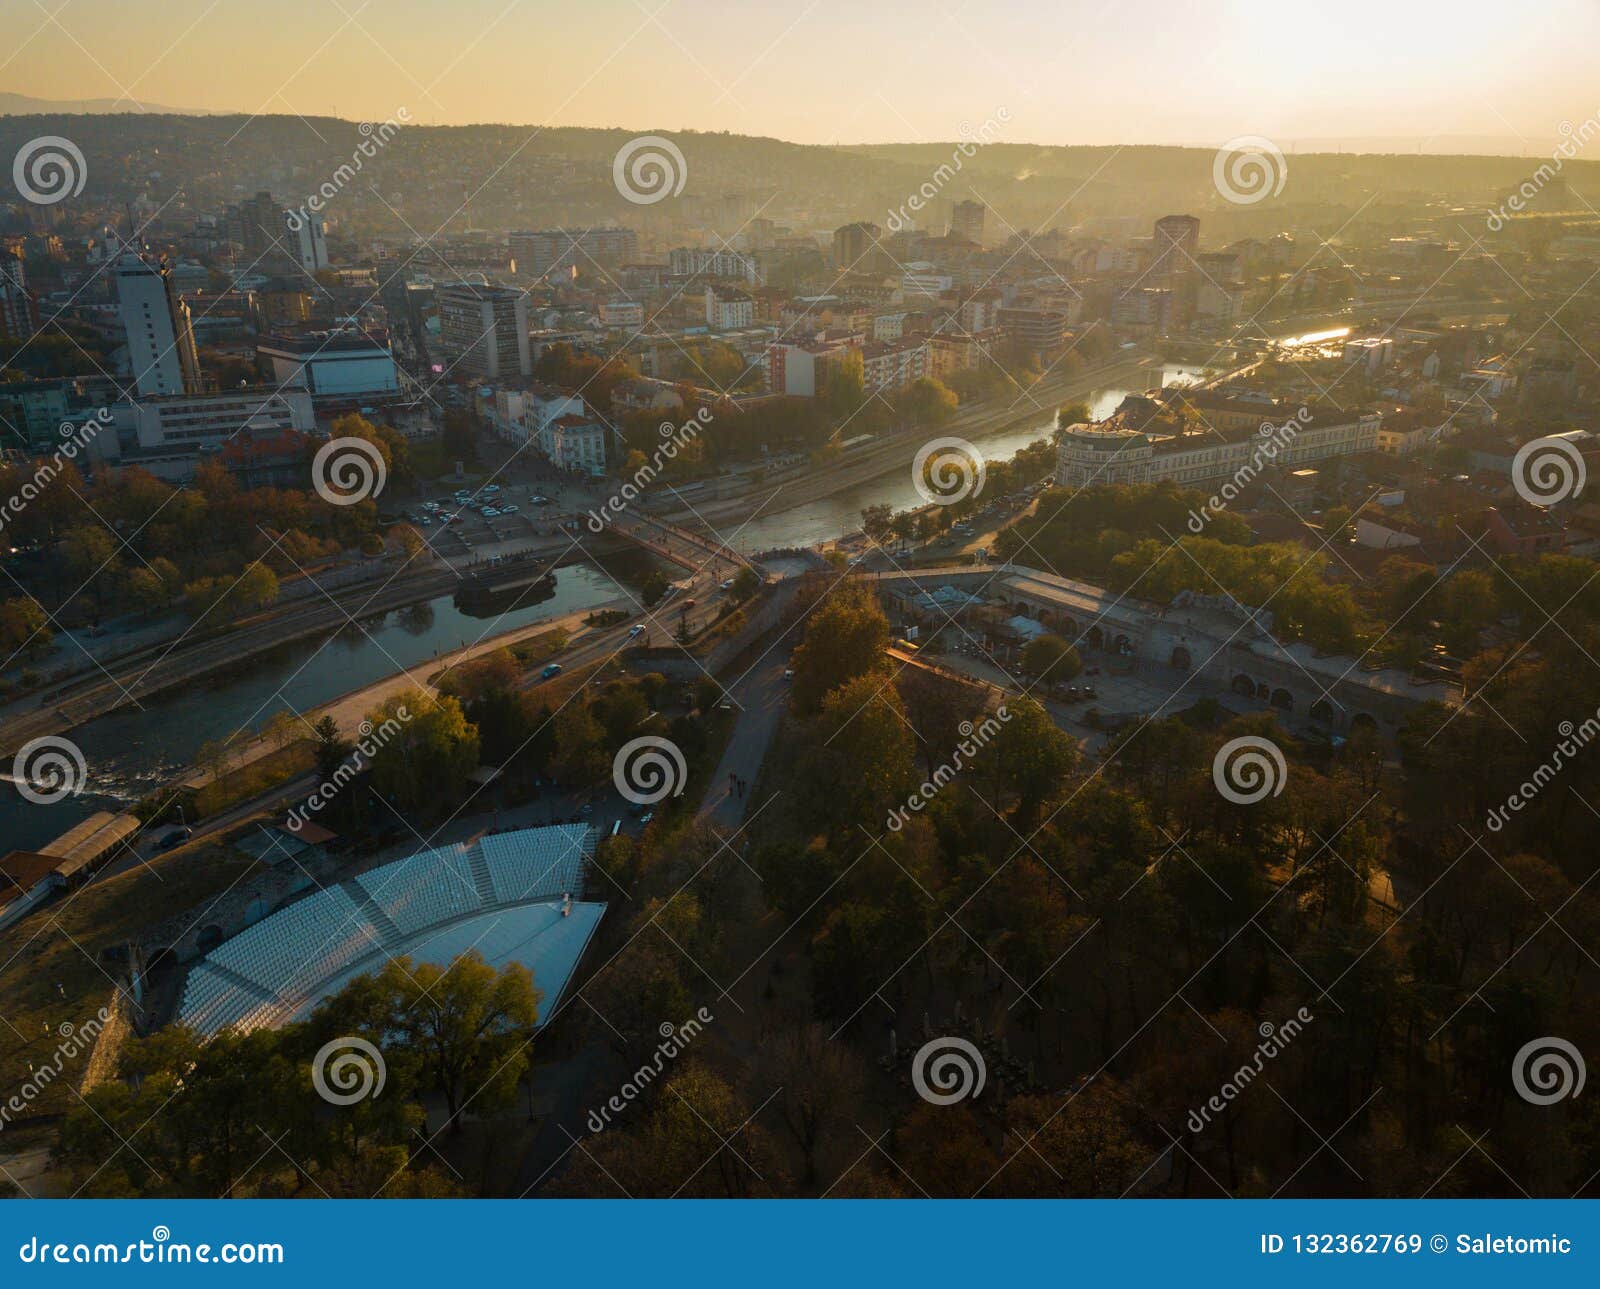 drone photo of the city of nis